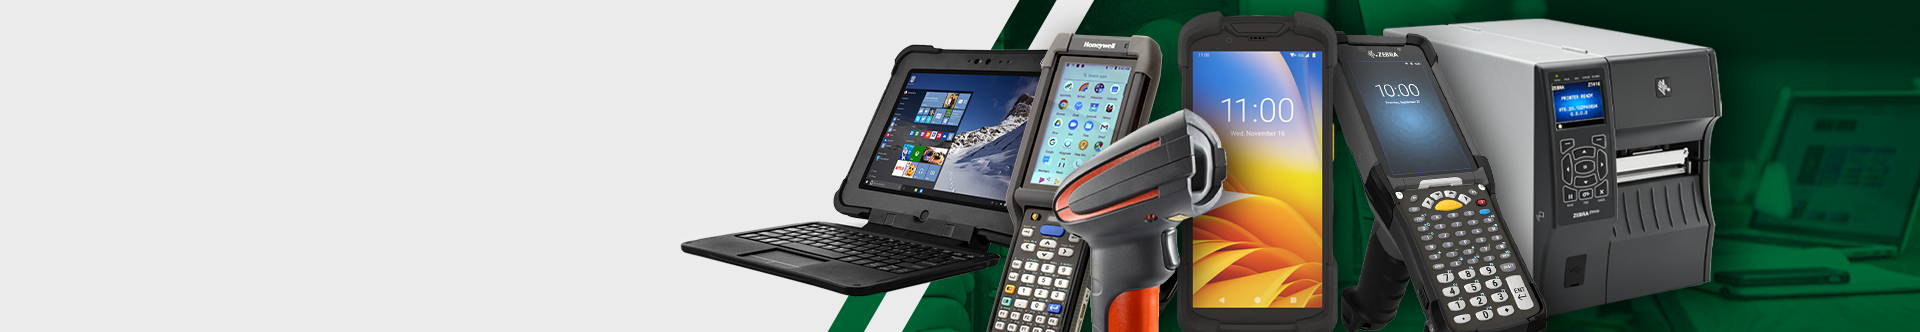 Depicts a variety of barcoding equipment including a tablet, scanner, mobile computers, and label printer.